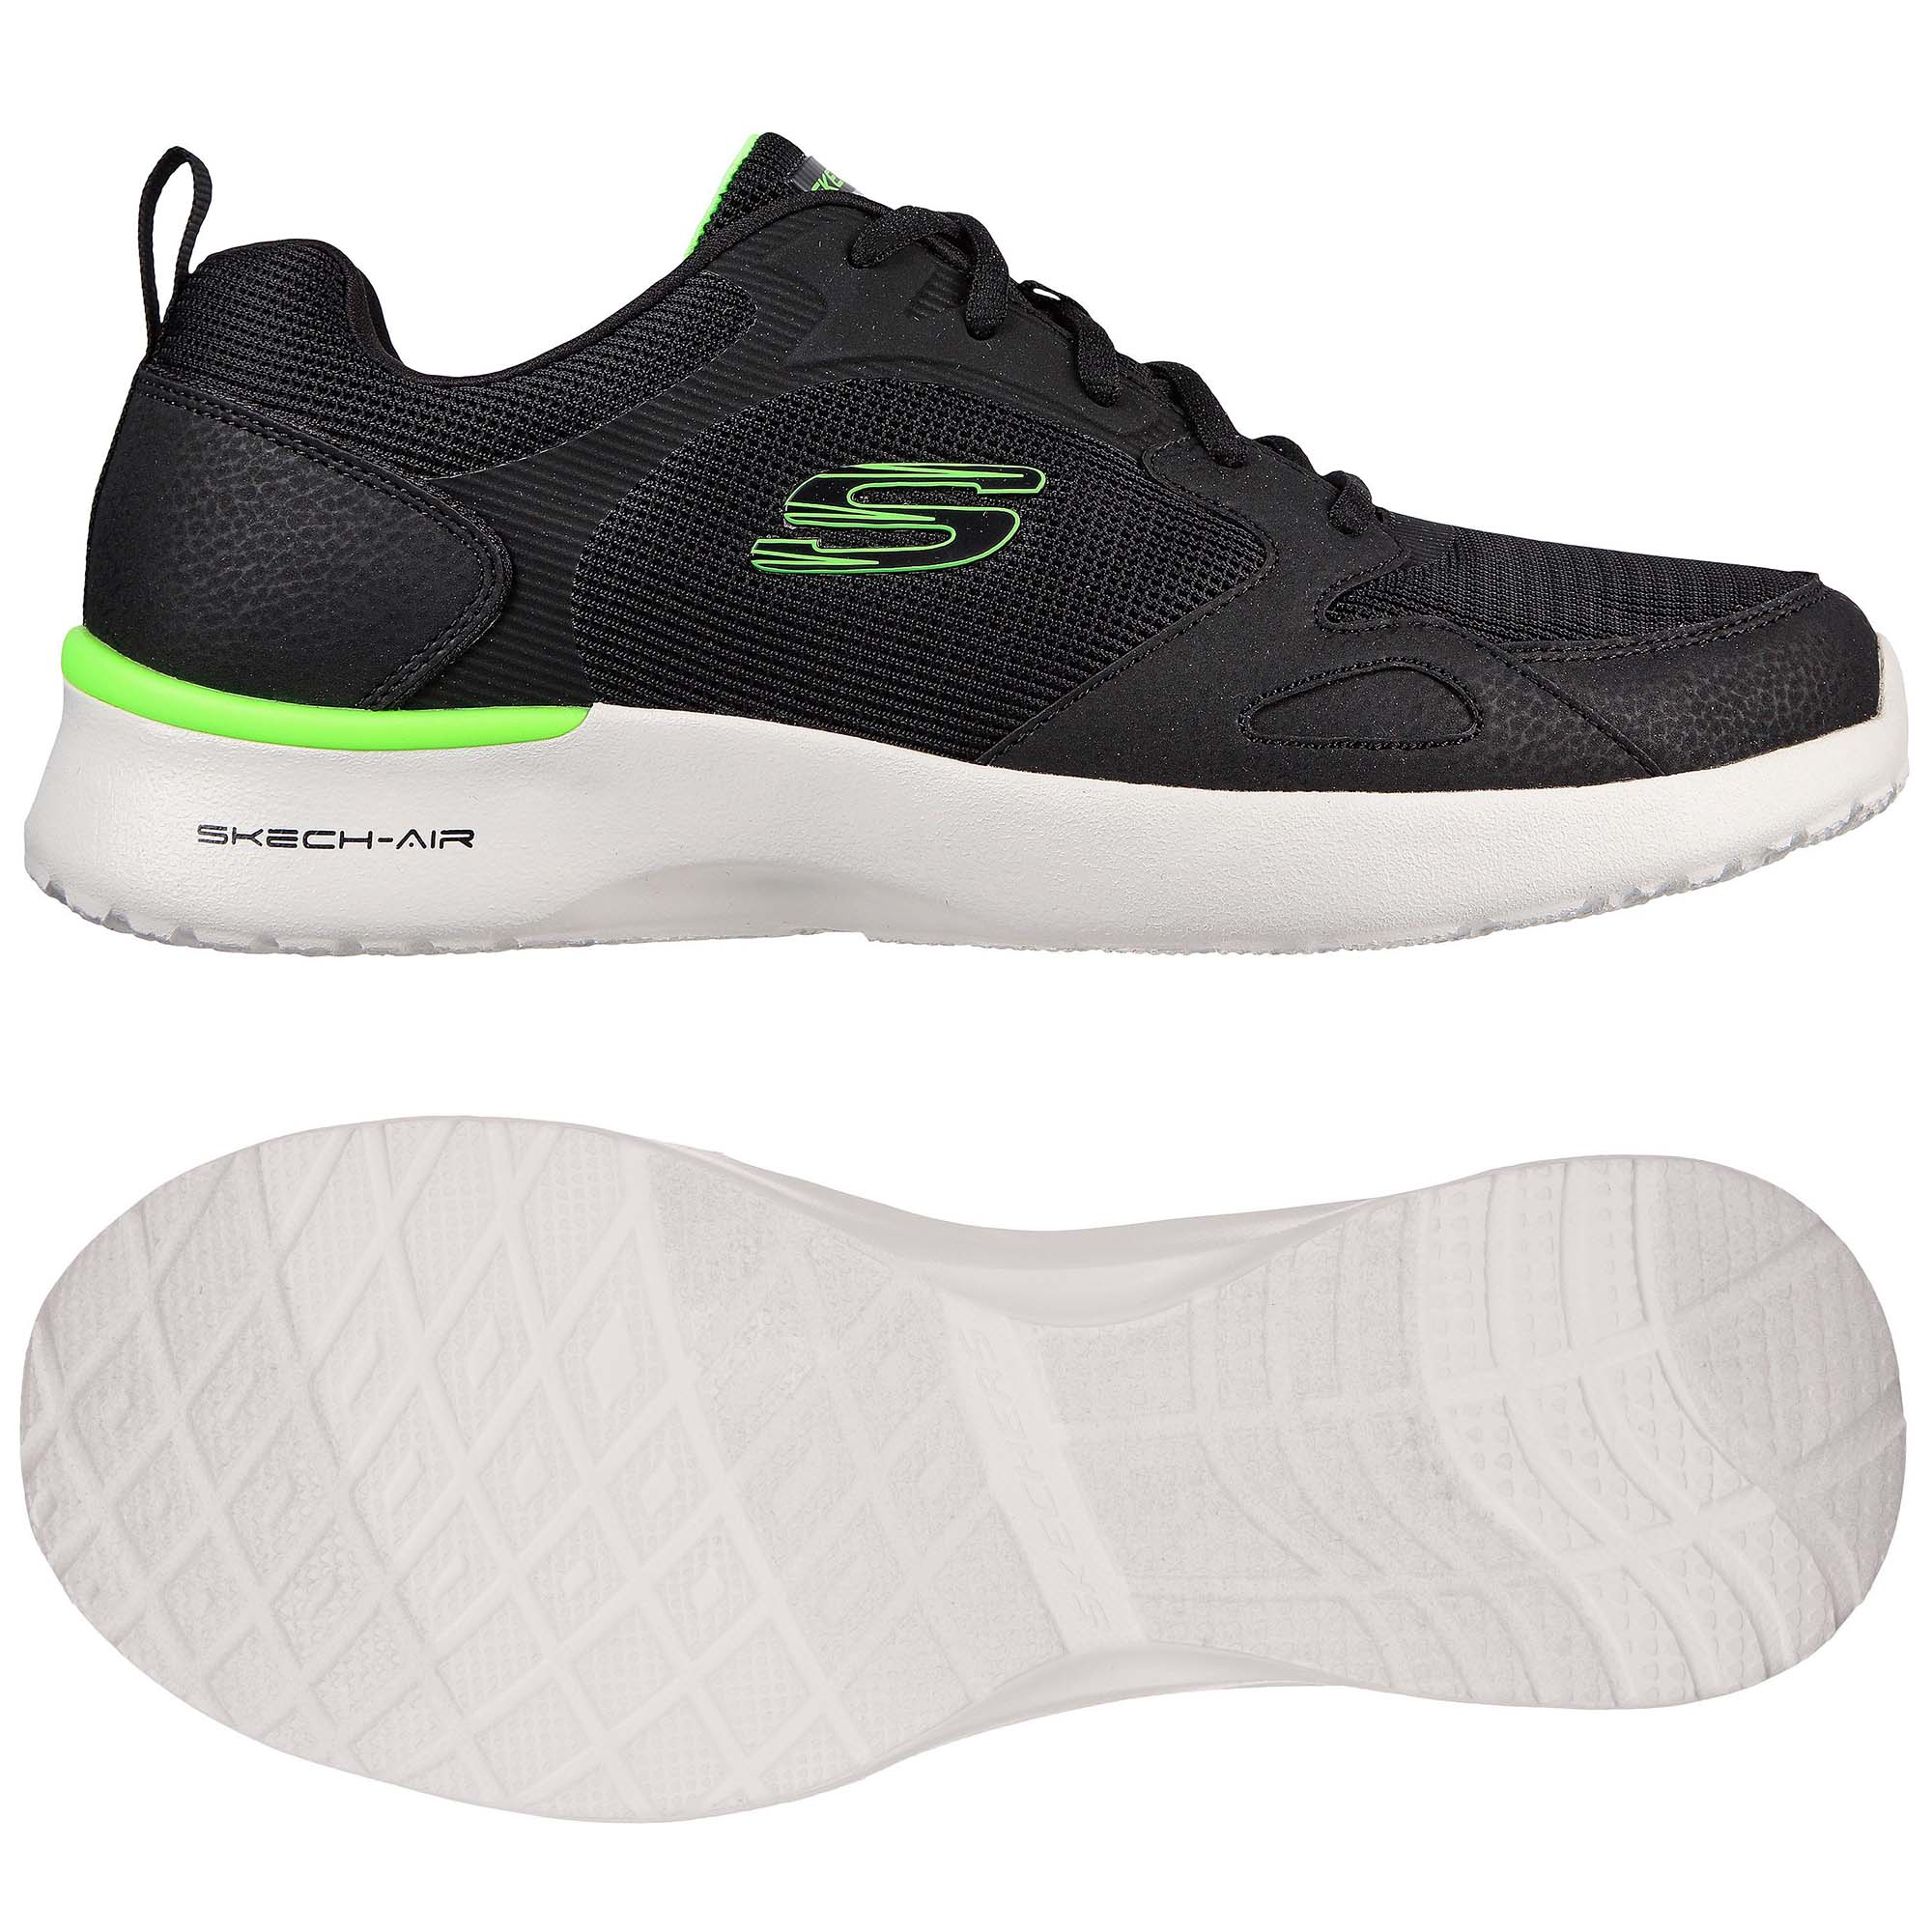 Skechers Skech-Air Dynamight Mens Training Shoes